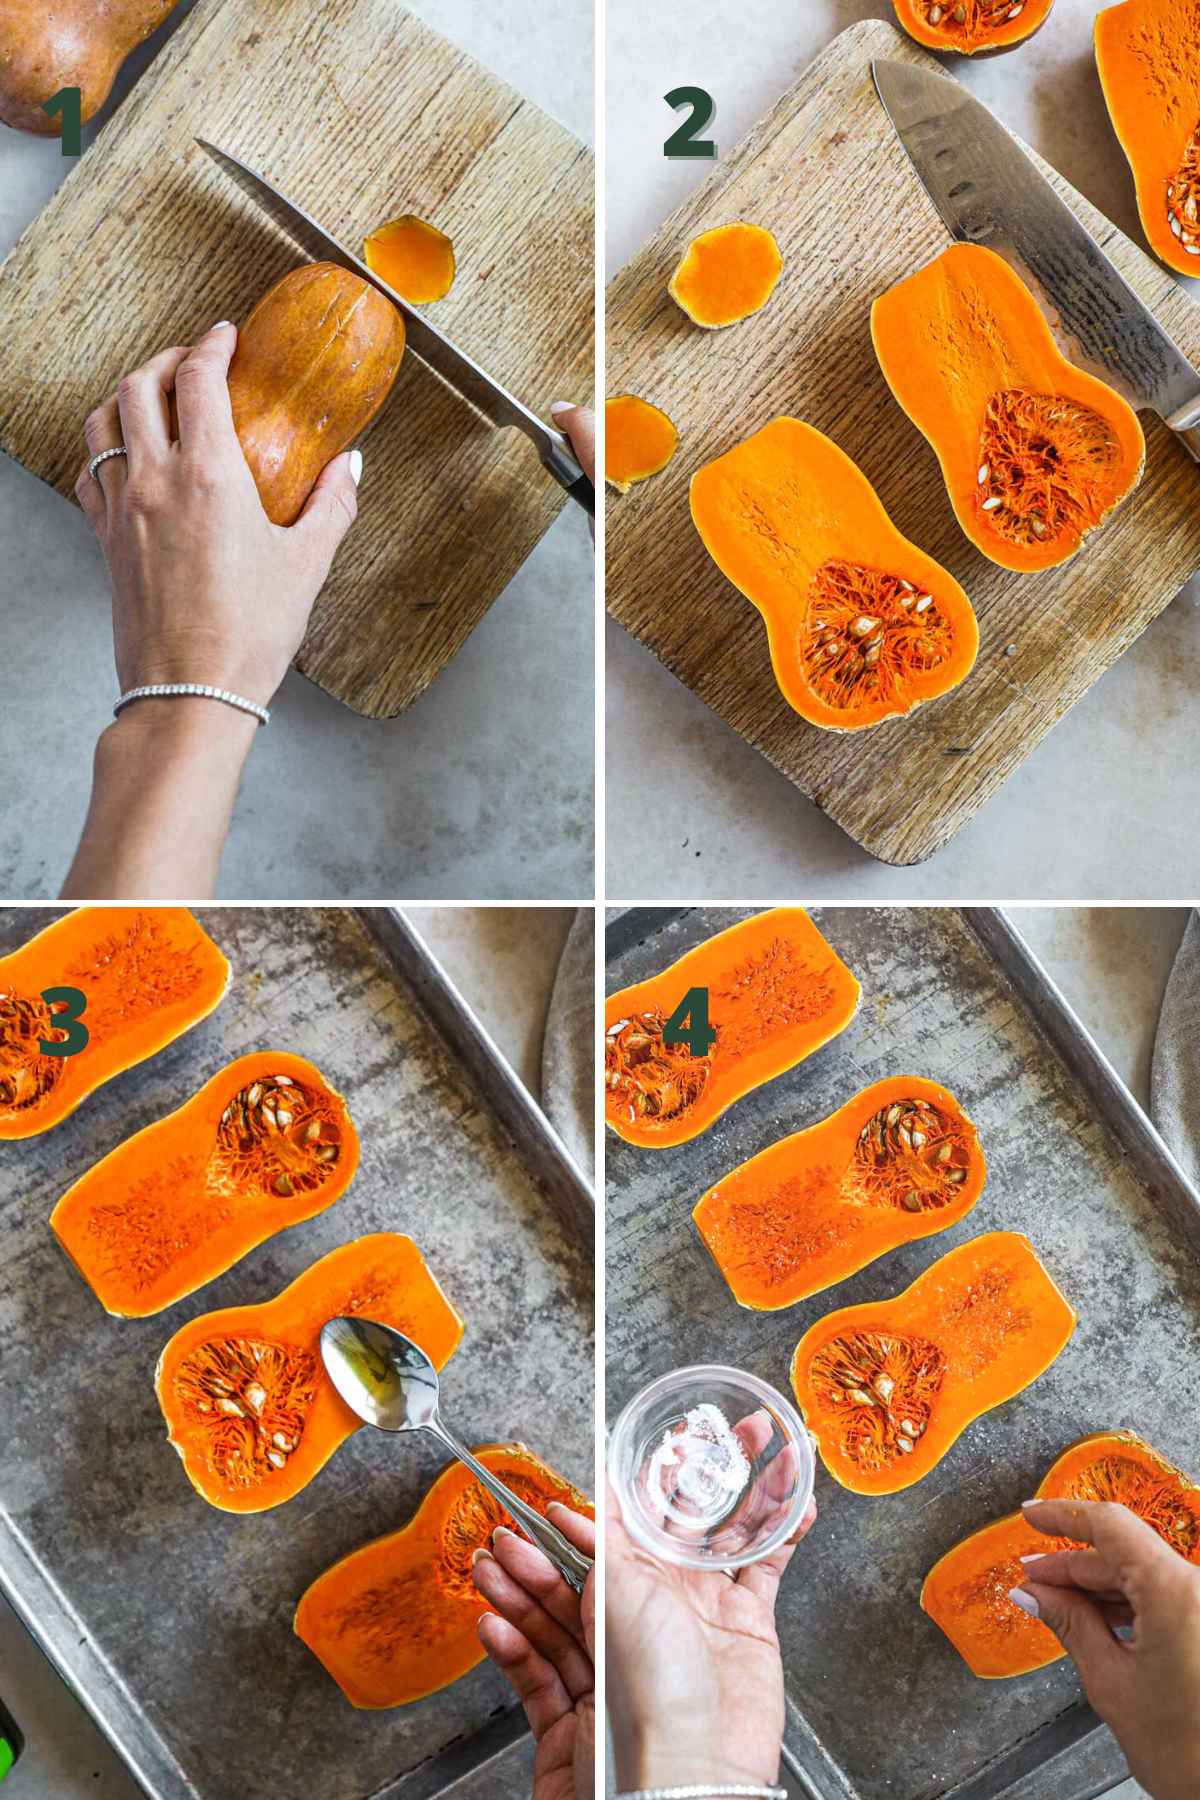 Steps to make roasted squash, including cutting the squash in half, drizzling with oil, and seasoning with salt.